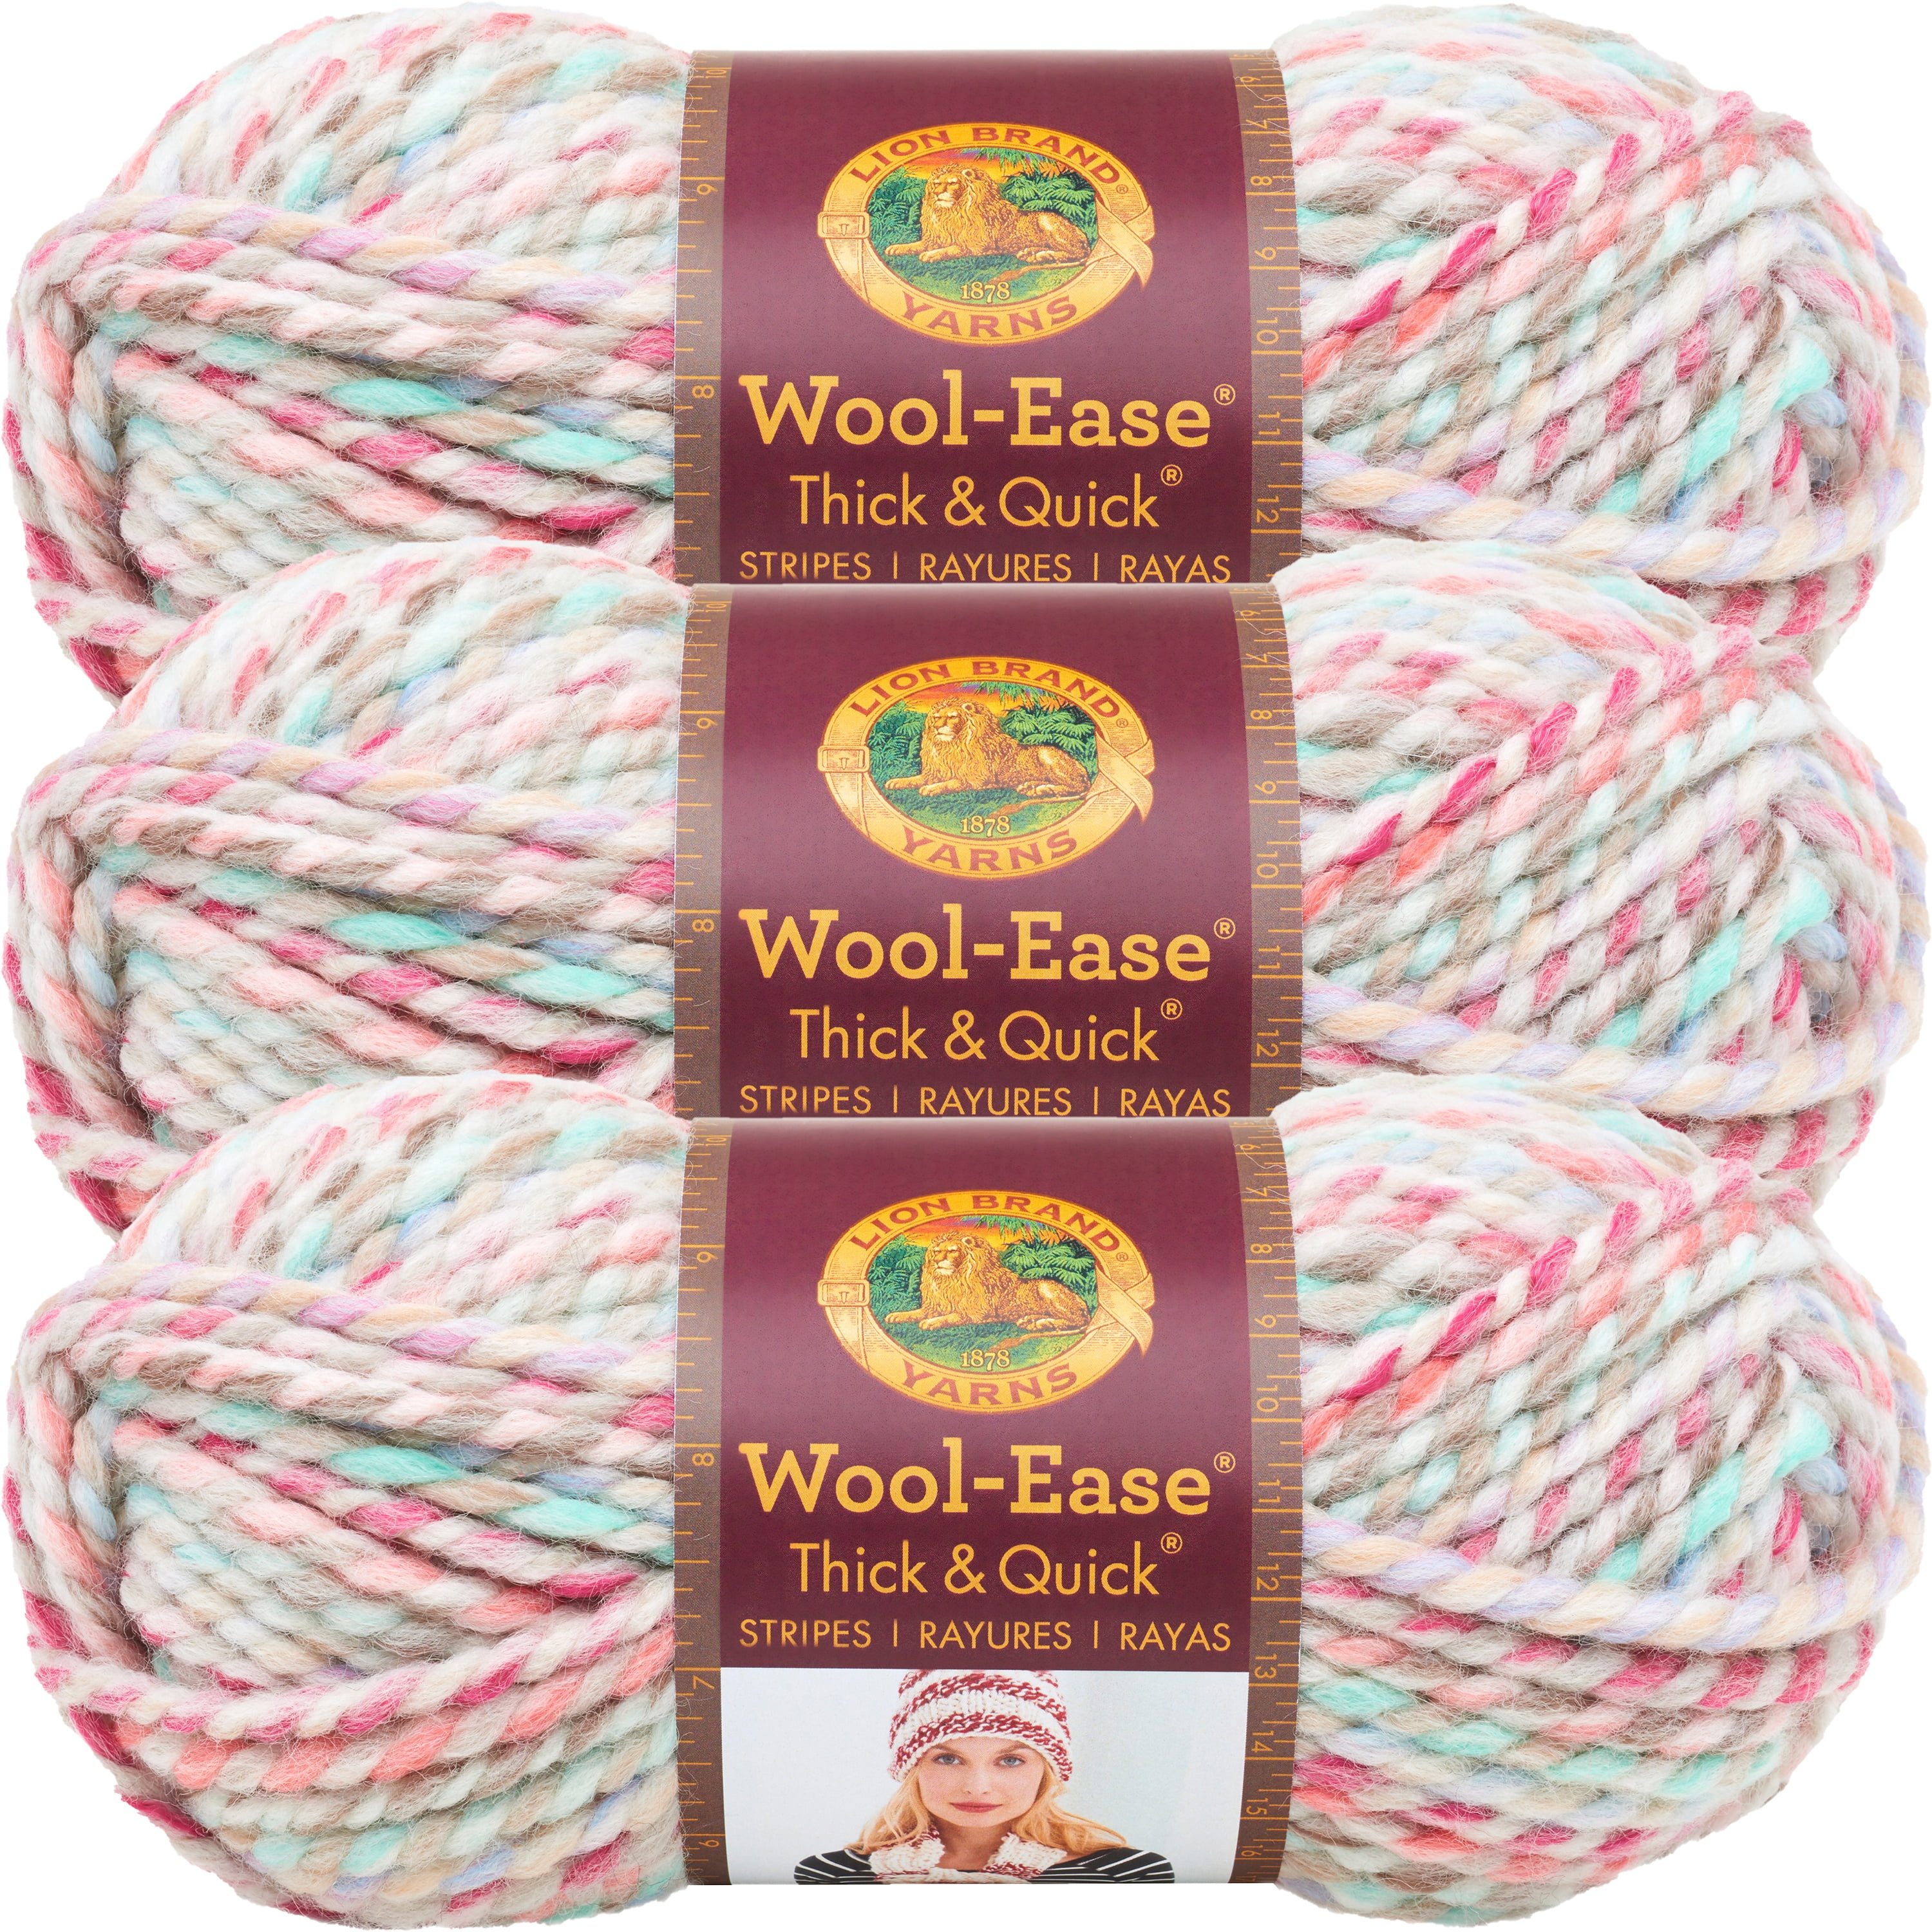 Lion Brand Wool-Ease Thick & Quick Yarn Carousel 023032646190 